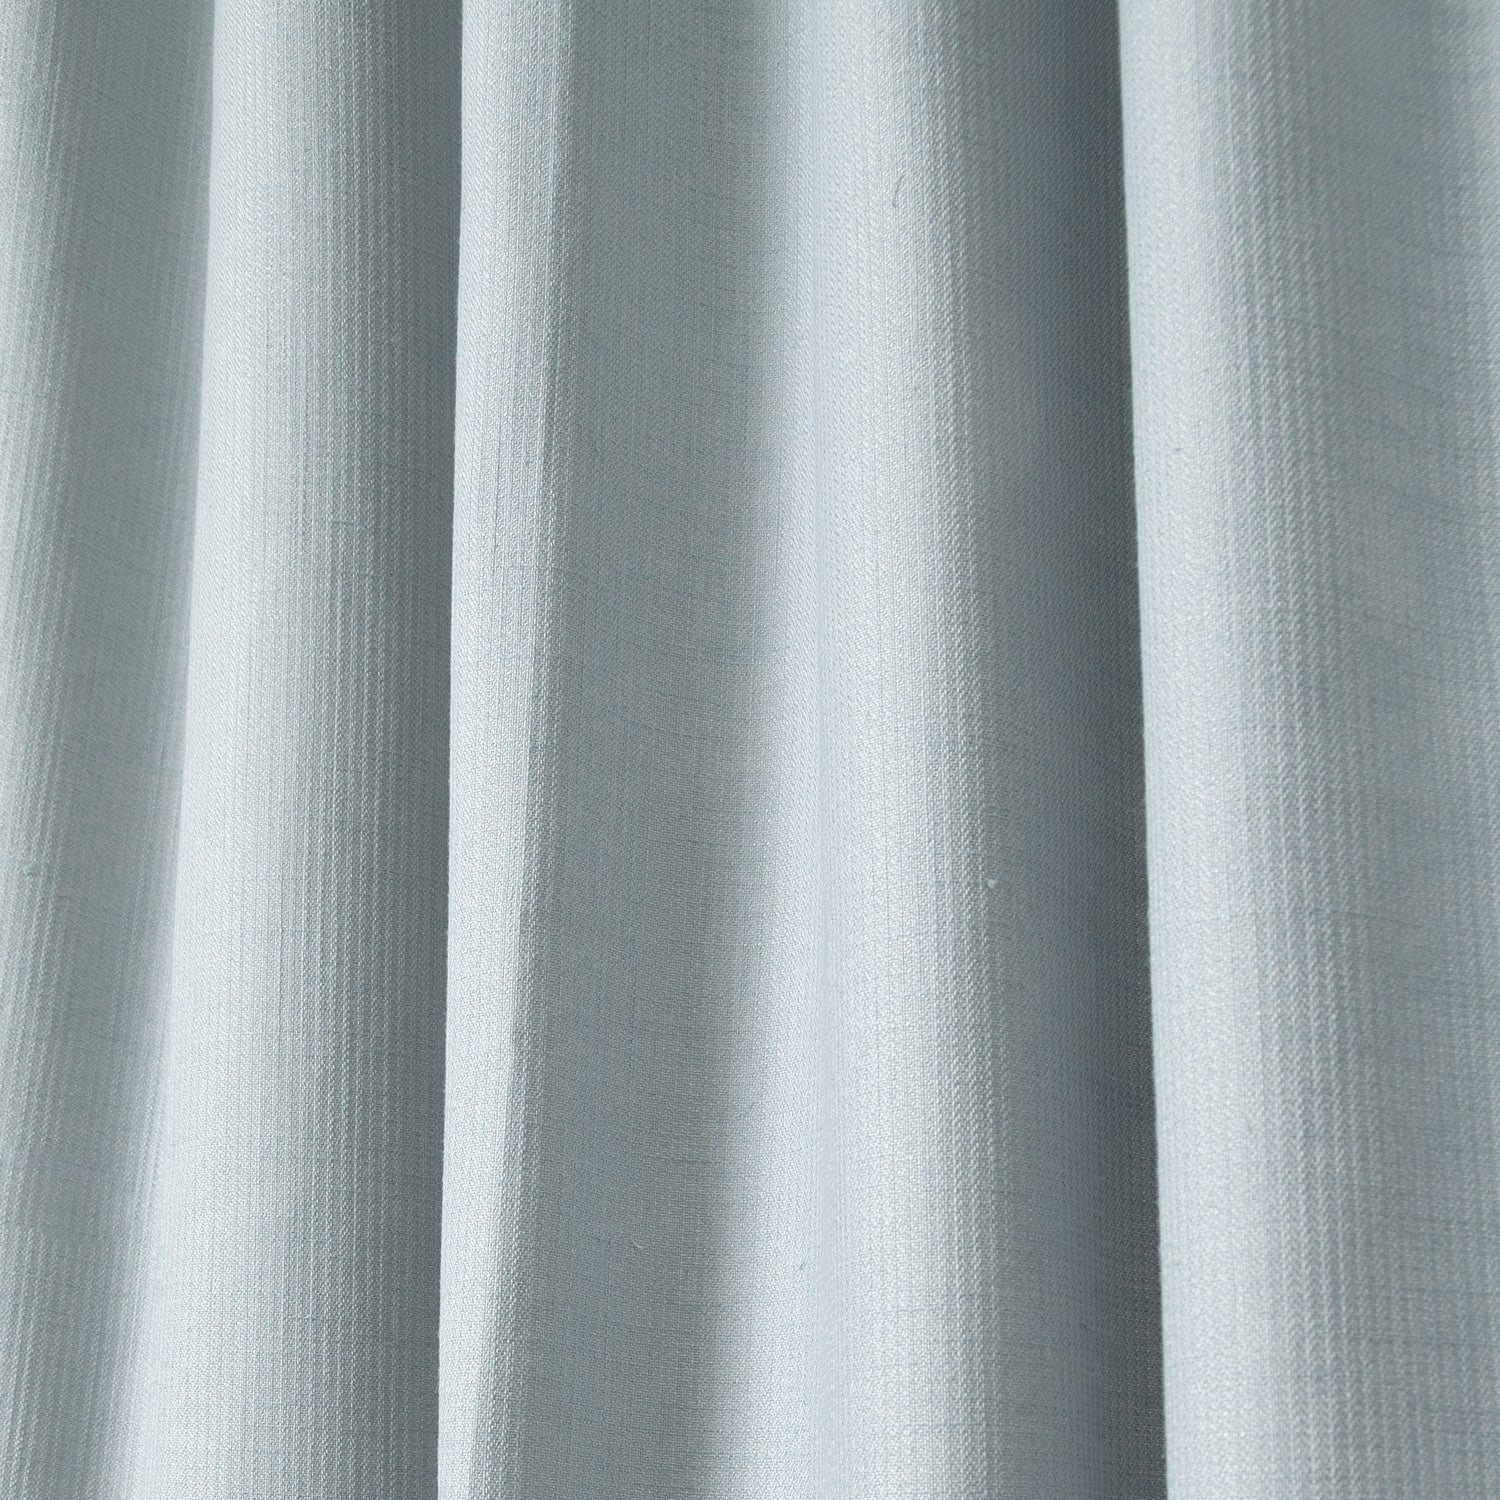 close up of grey blue curtains